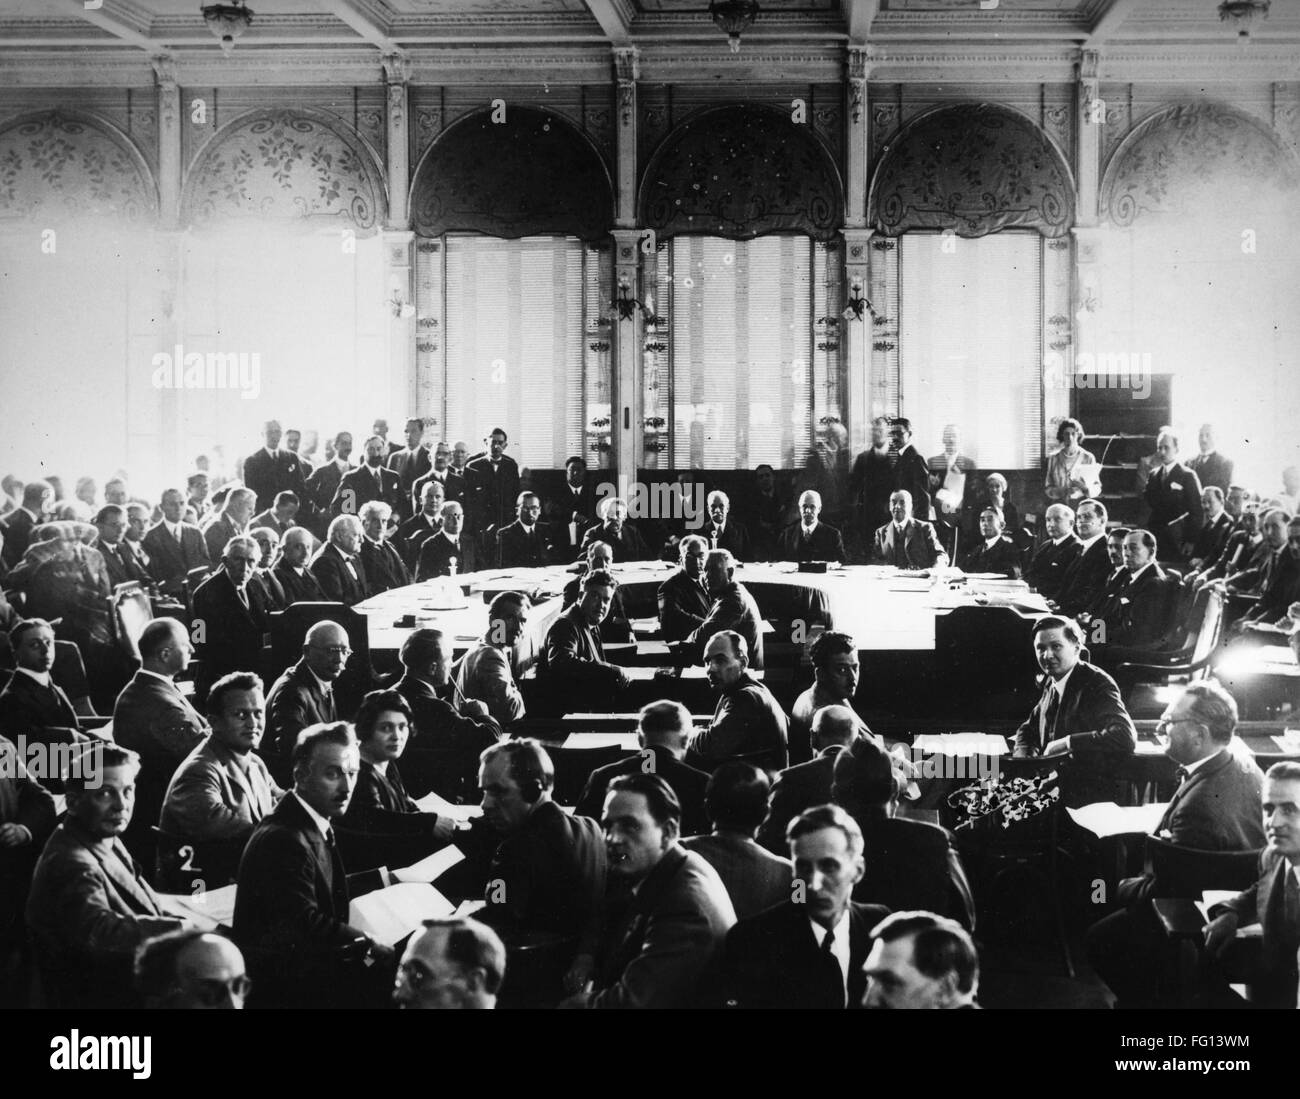 LEAGUE OF NATIONS, 1930. /nOpening session of the Council of the League of Nations in Geneva, Switzerland, September 1930. Stock Photo